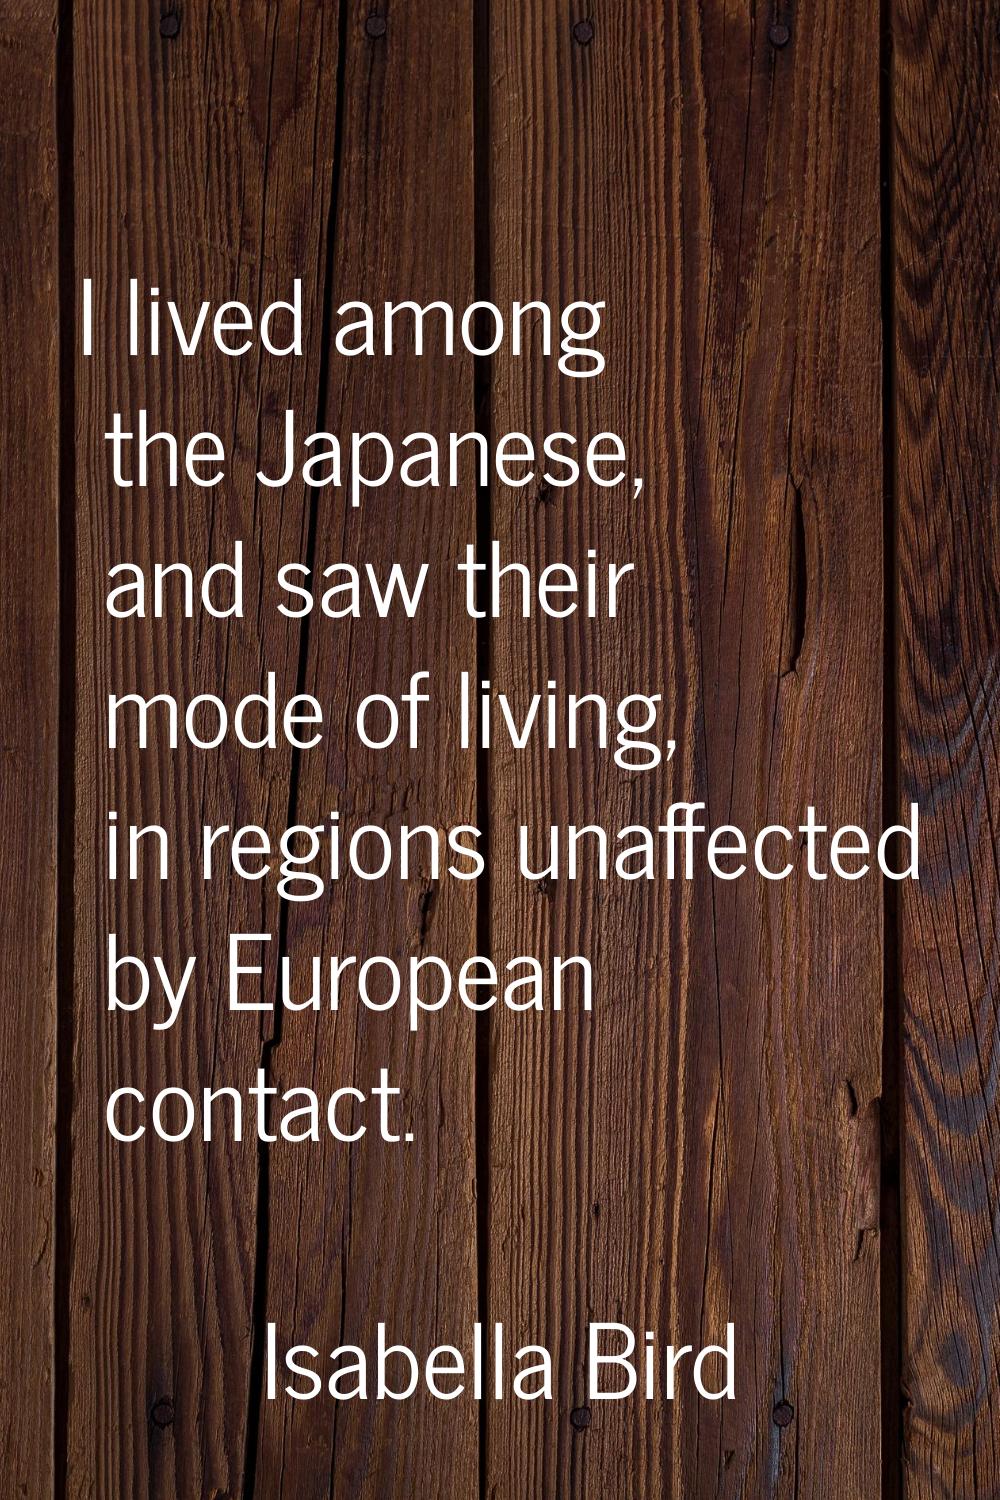 I lived among the Japanese, and saw their mode of living, in regions unaffected by European contact